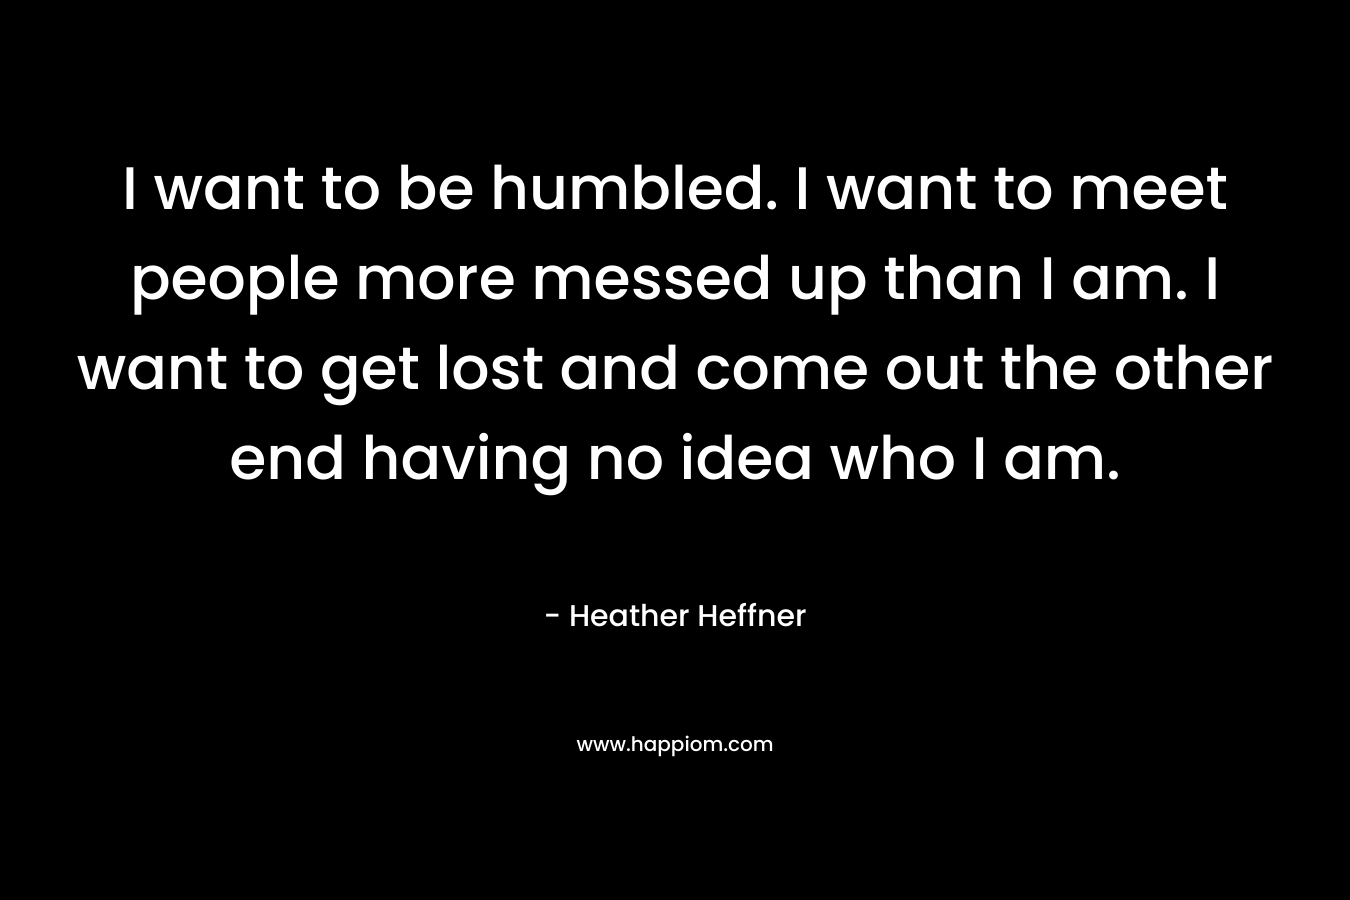 I want to be humbled. I want to meet people more messed up than I am. I want to get lost and come out the other end having no idea who I am. – Heather Heffner